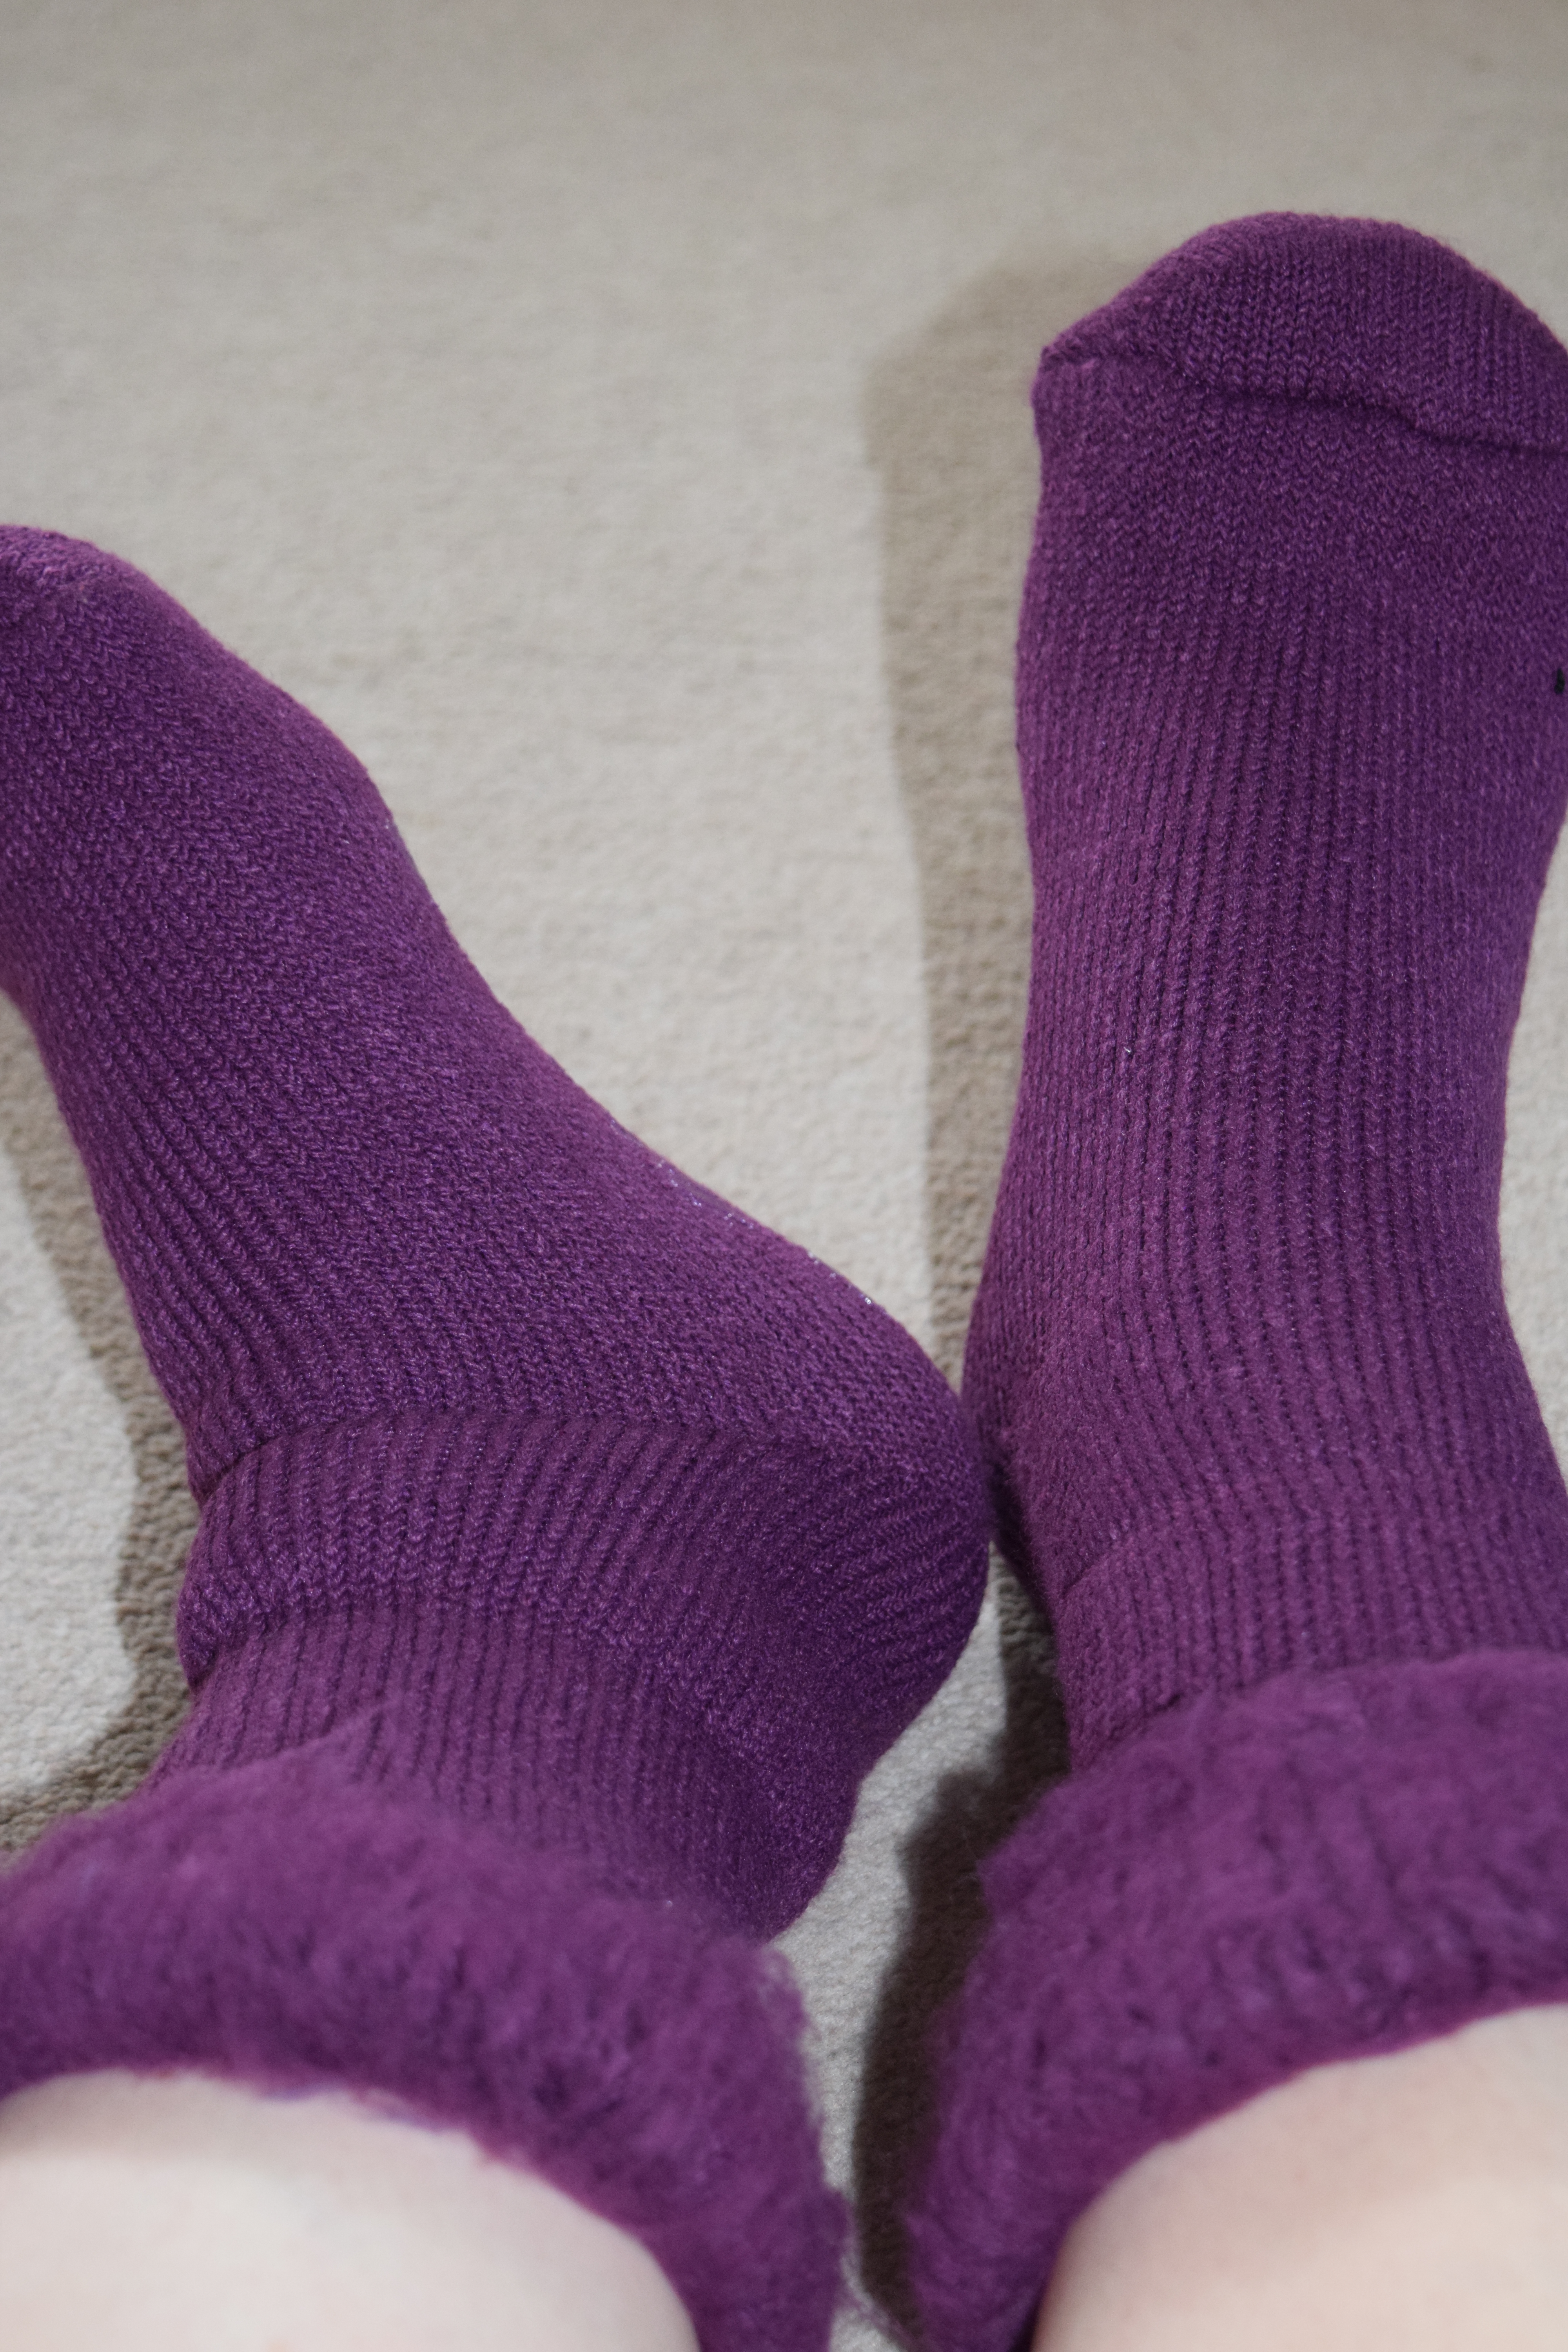 Heat Holders slipper socks review and giveaway - Family Fever